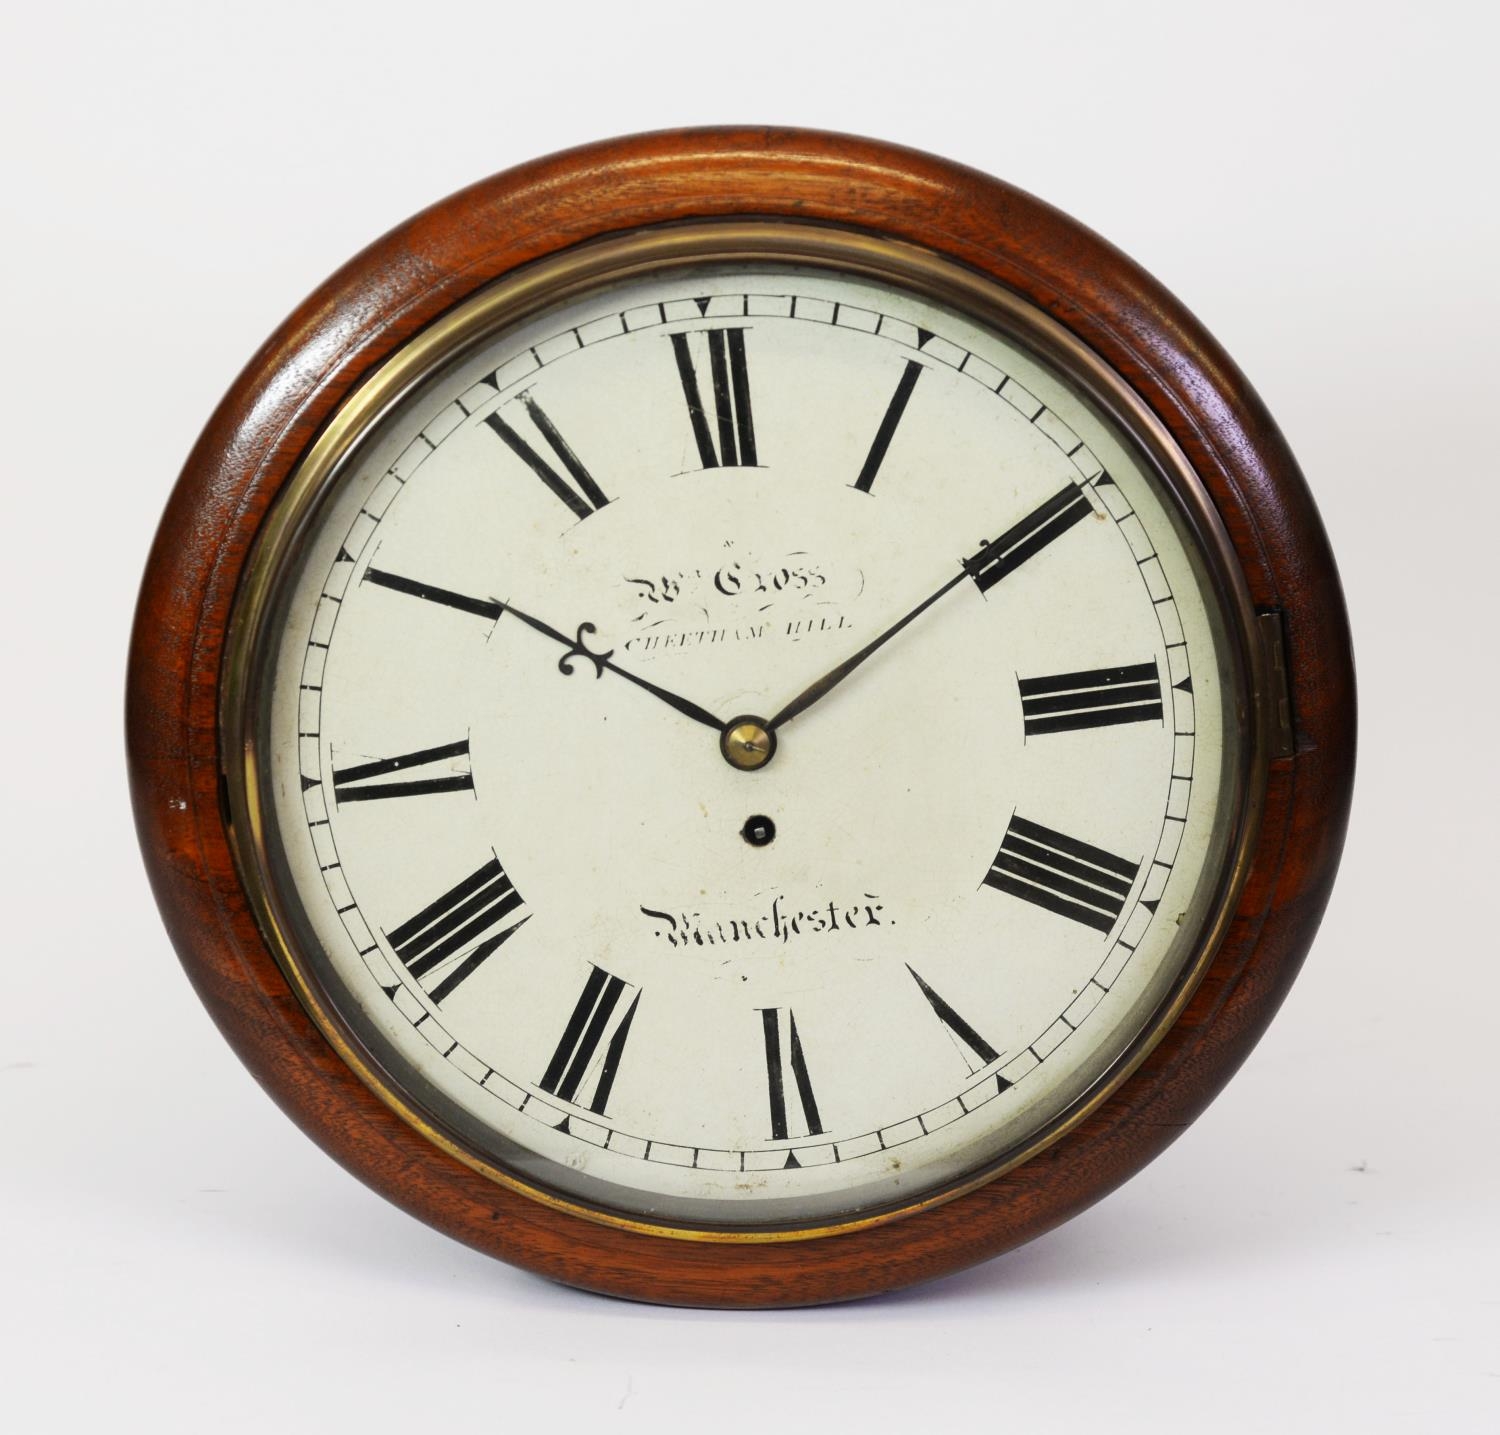 WILLIAM CROSS, CHEETHAM HILL, MANCHESTER, MAHOGANY CASED WALL CLOCK, of typical; form with 12” Roman